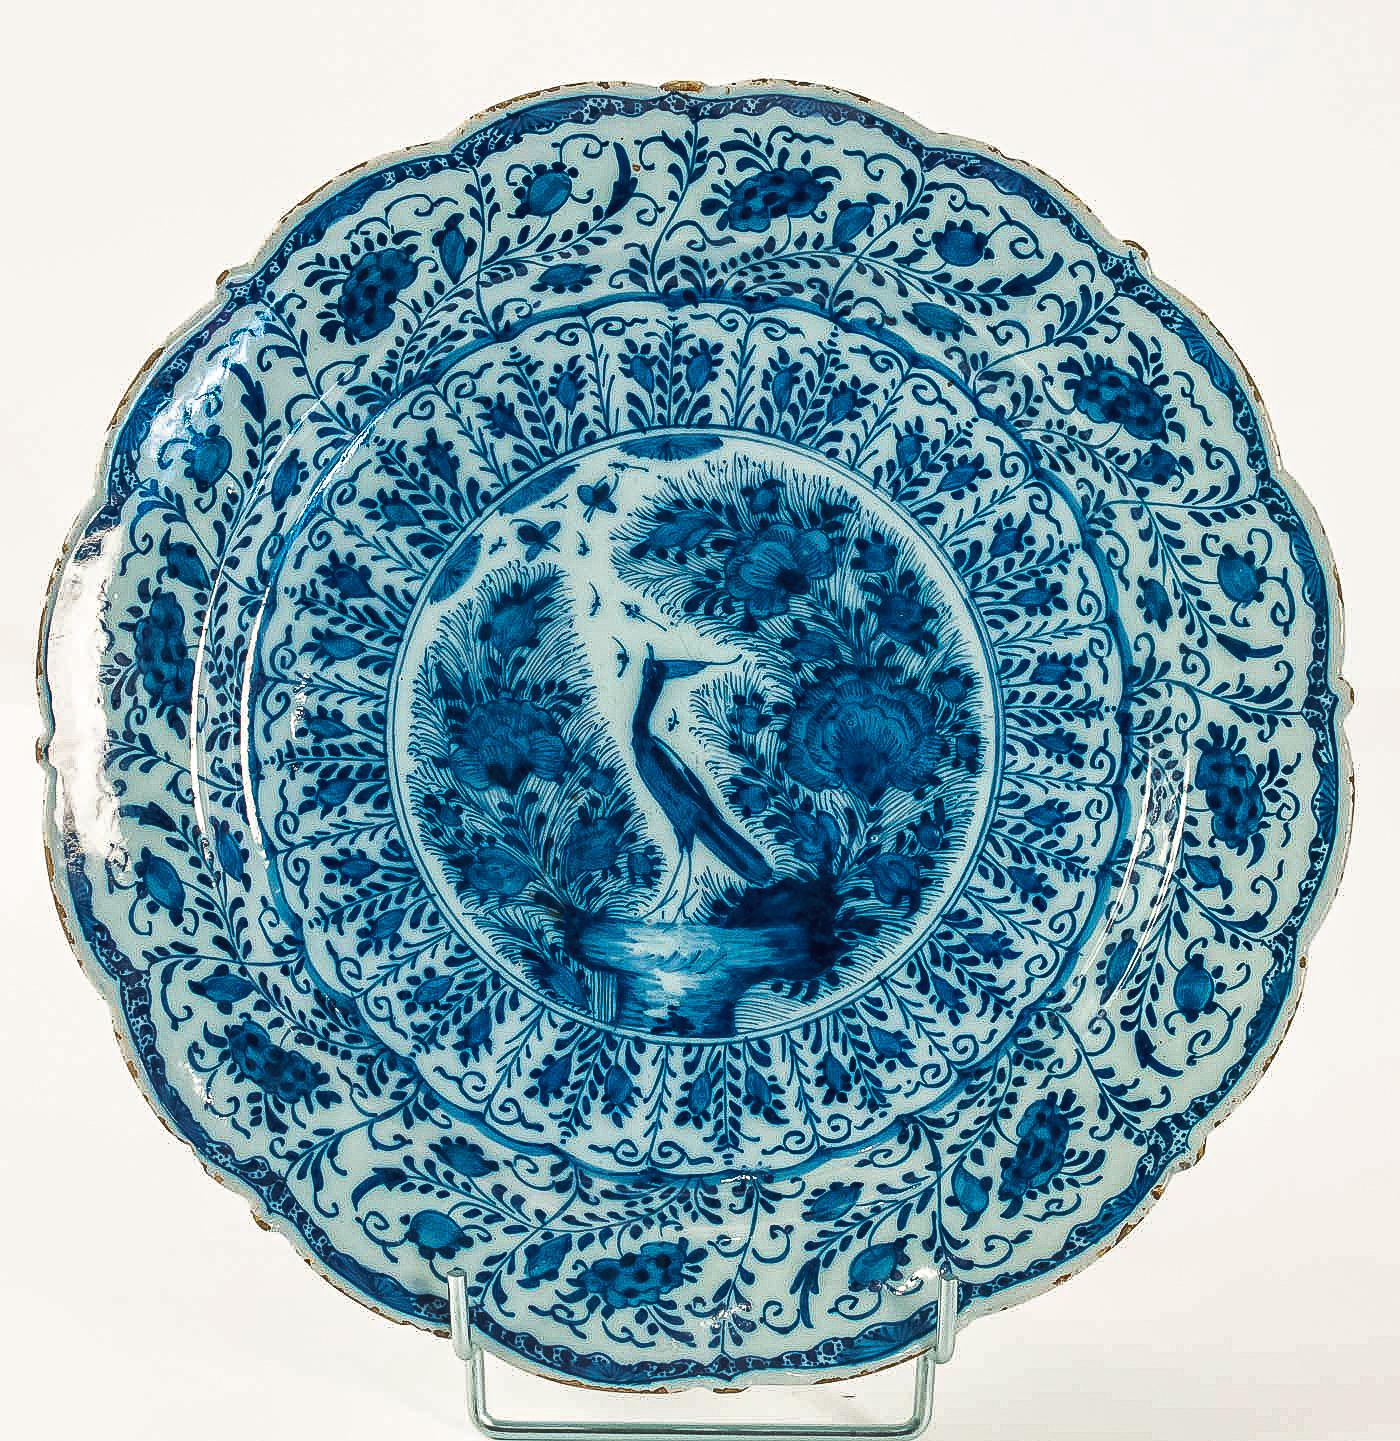 Hand-Painted Sign by Ax, Mid-18th Century, Magnificent Pair of Faience Delft Round Dishes